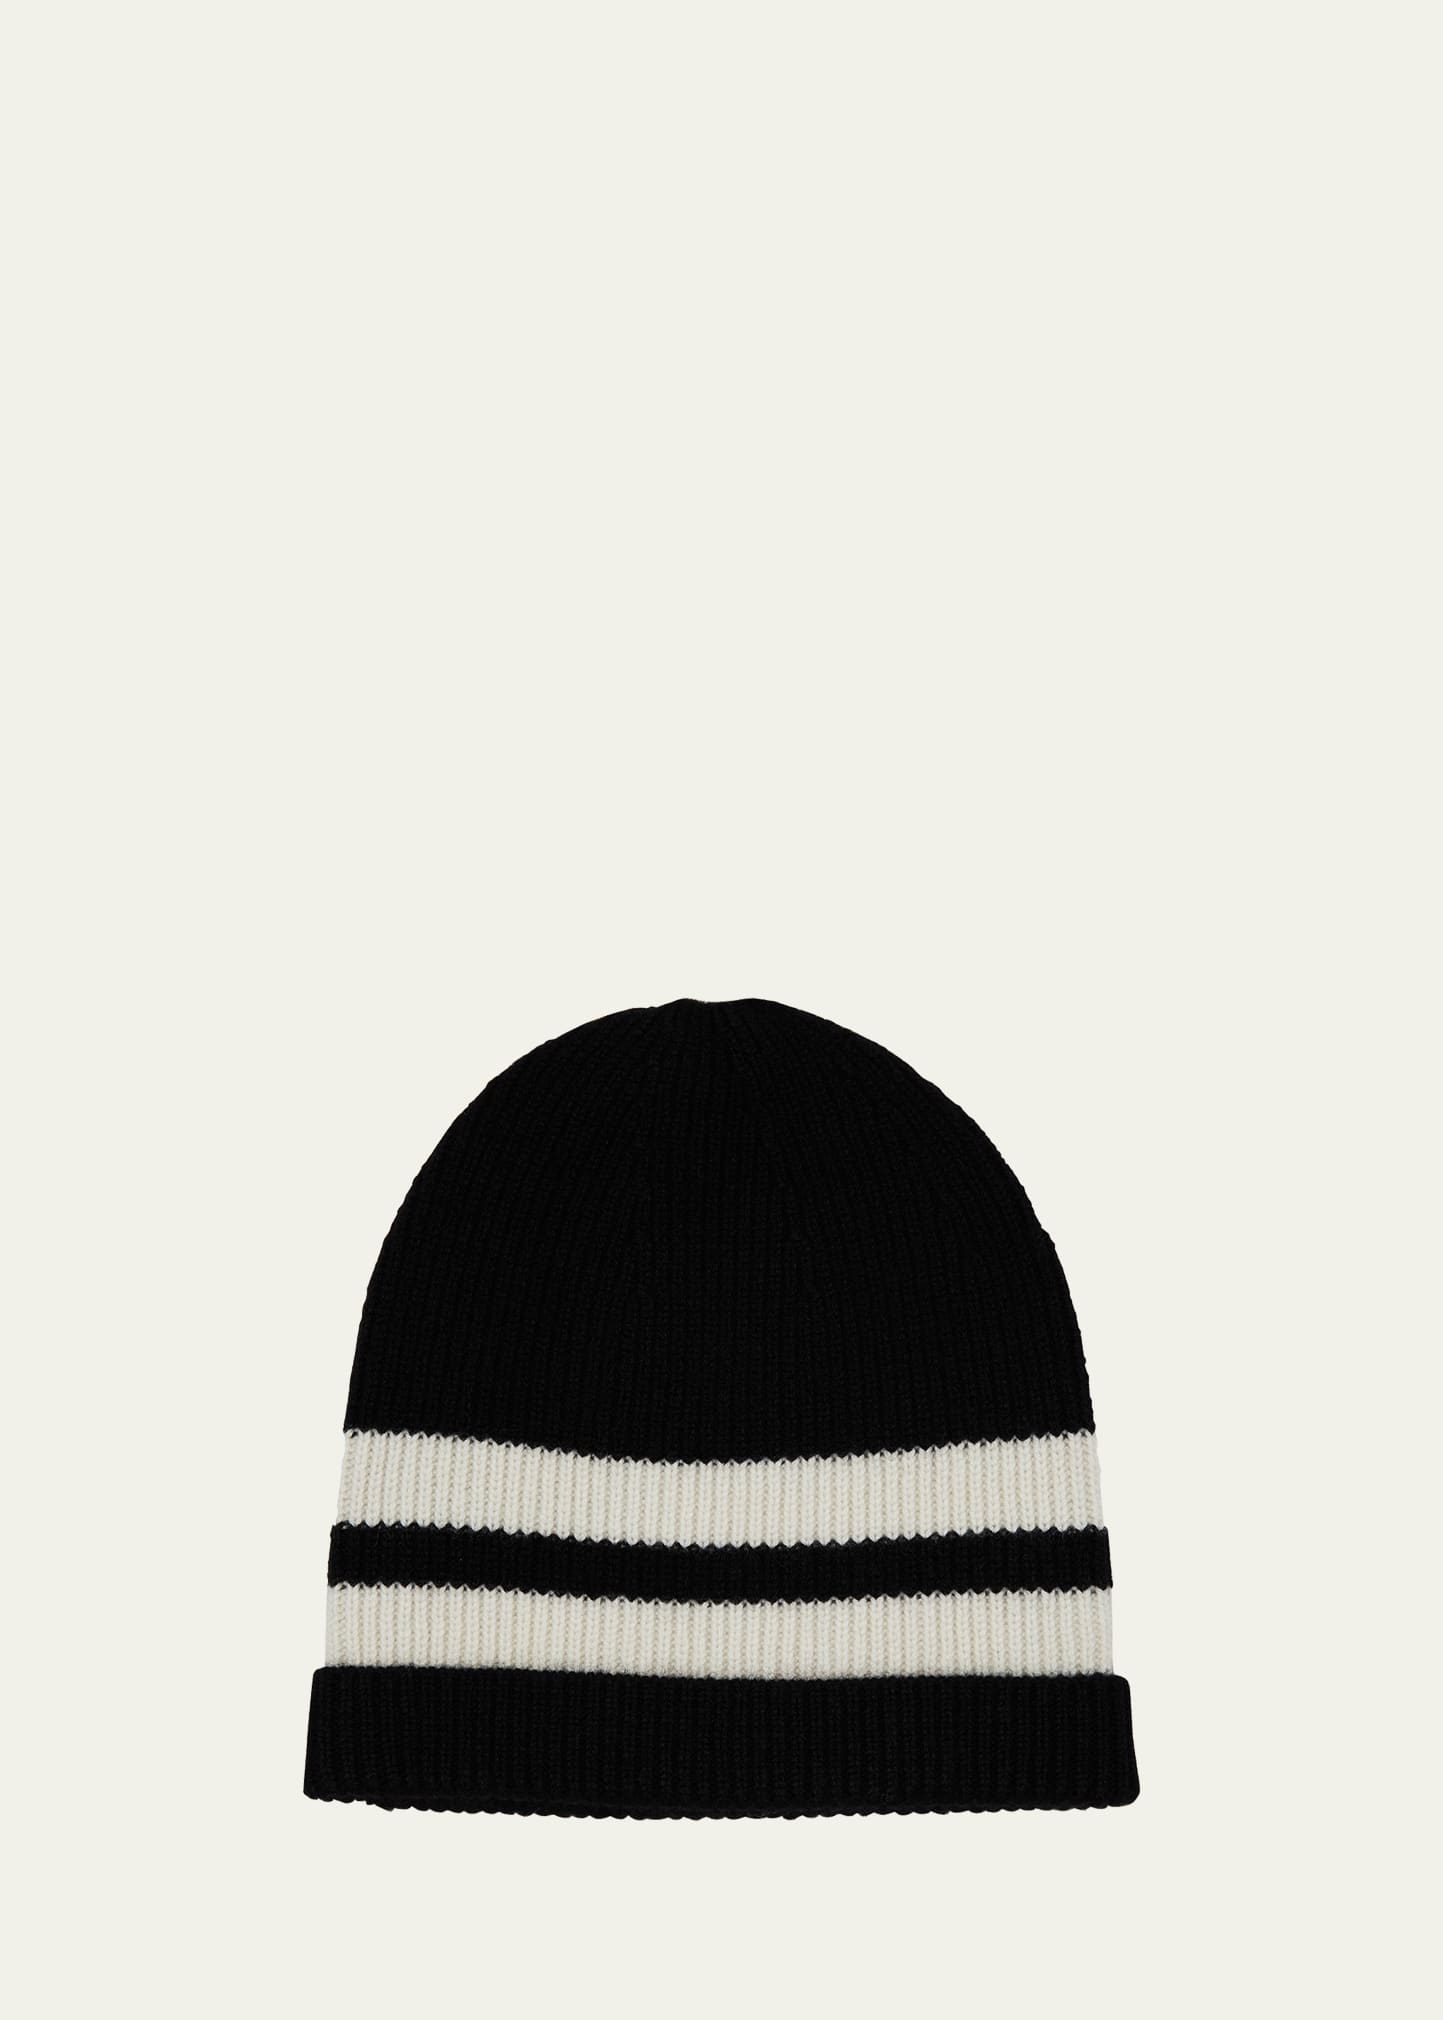 Lisa Yang Florence Striped Cashmere Beanie In Black